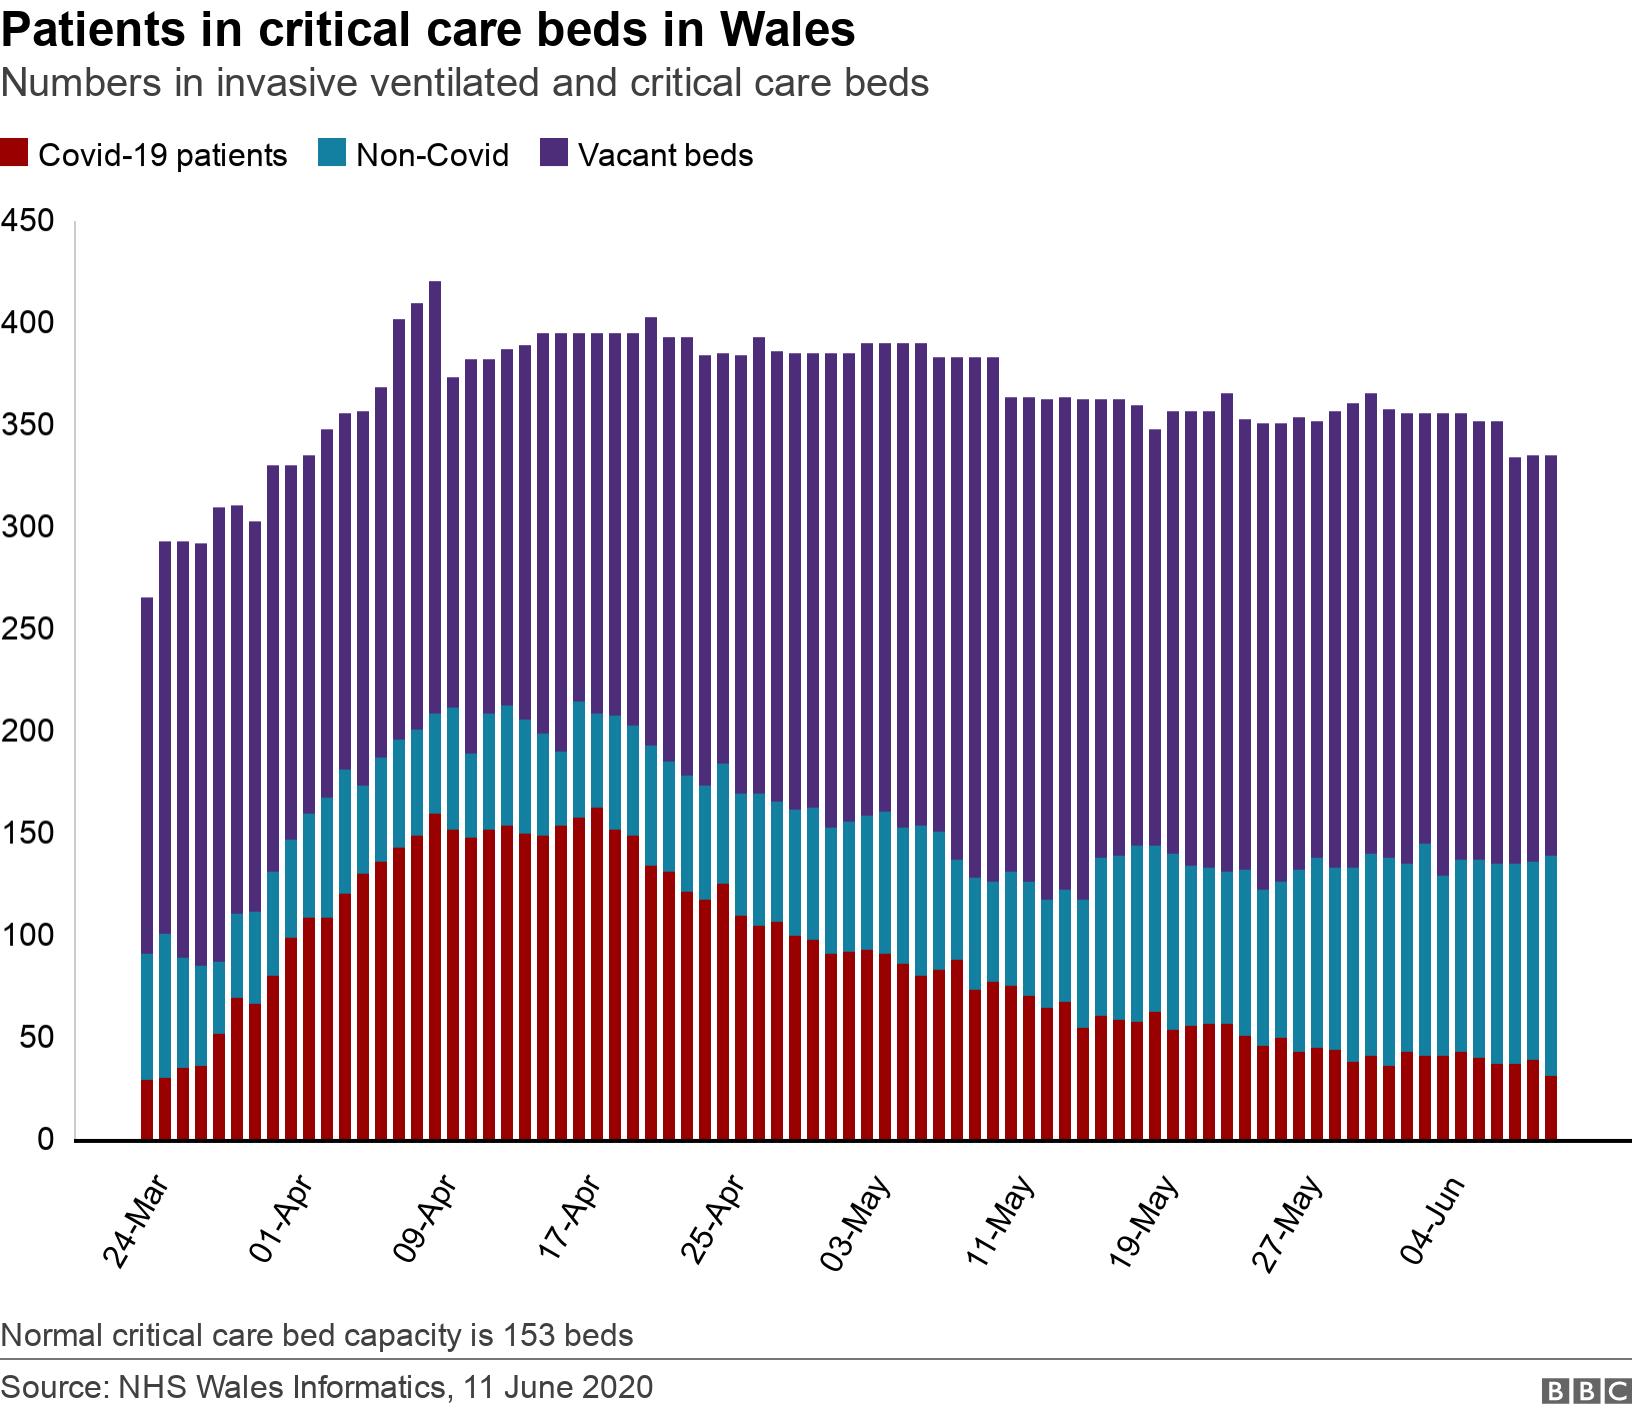 Patients in critical care beds in Wales. Numbers in invasive ventilated and critical care beds.  Normal critical care bed capacity is 153 beds.